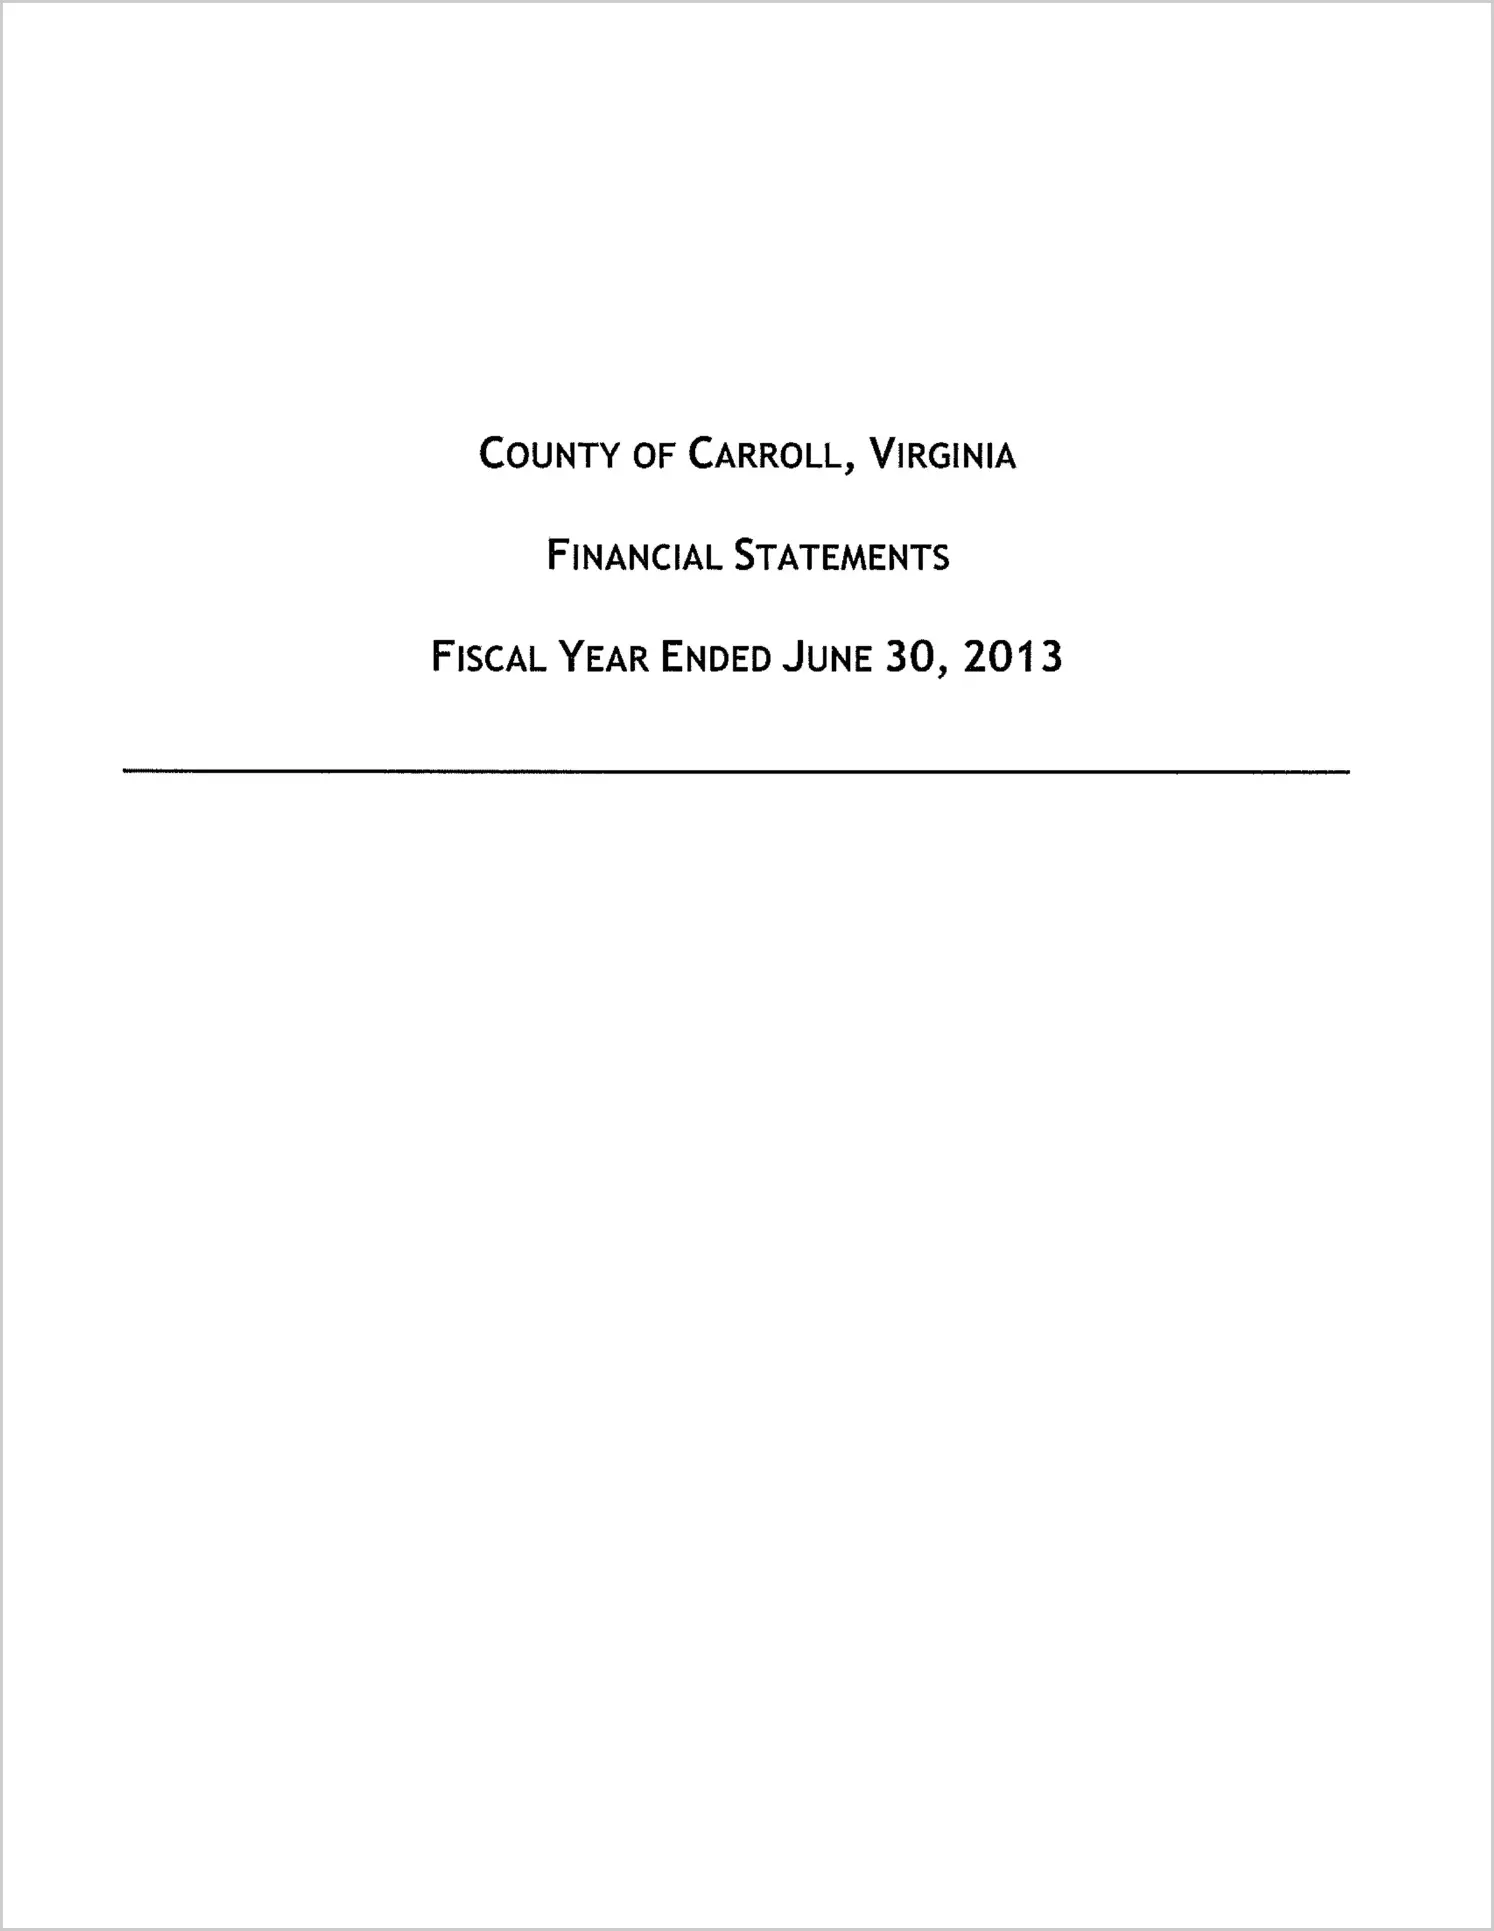 2013 Annual Financial Report for County of Carroll